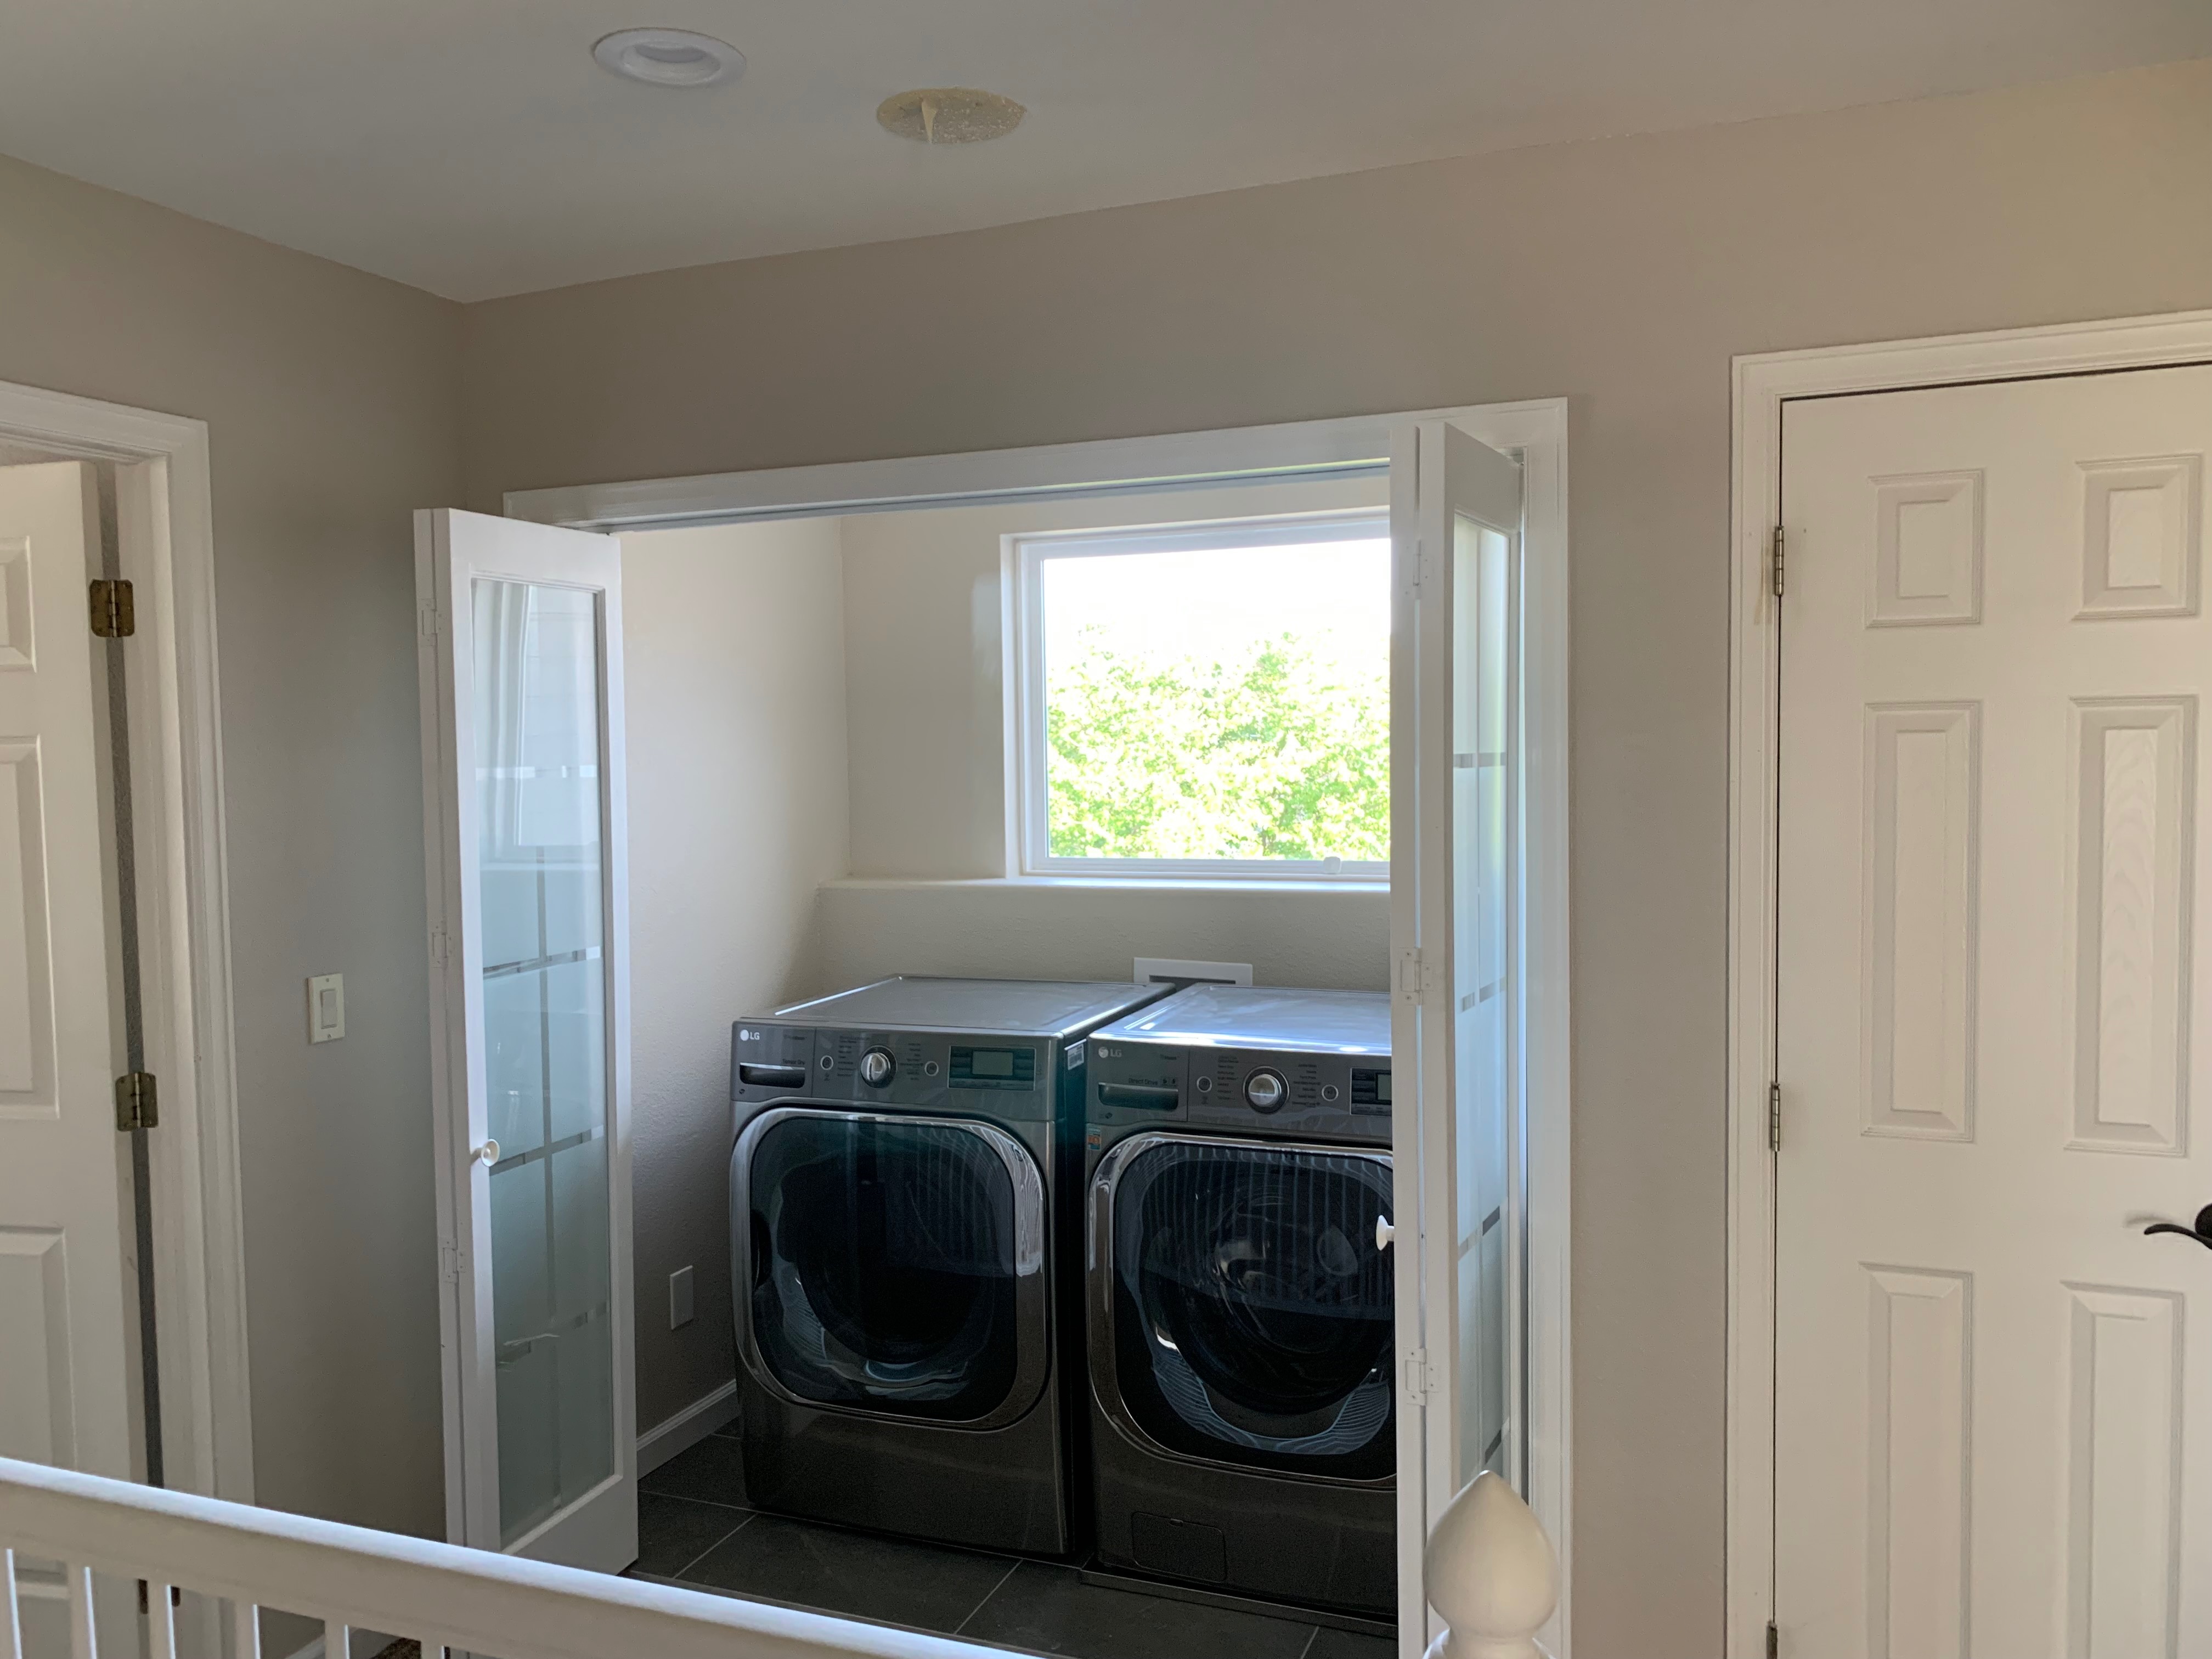 Second floor laundry closet | Twinsprings Research Institute